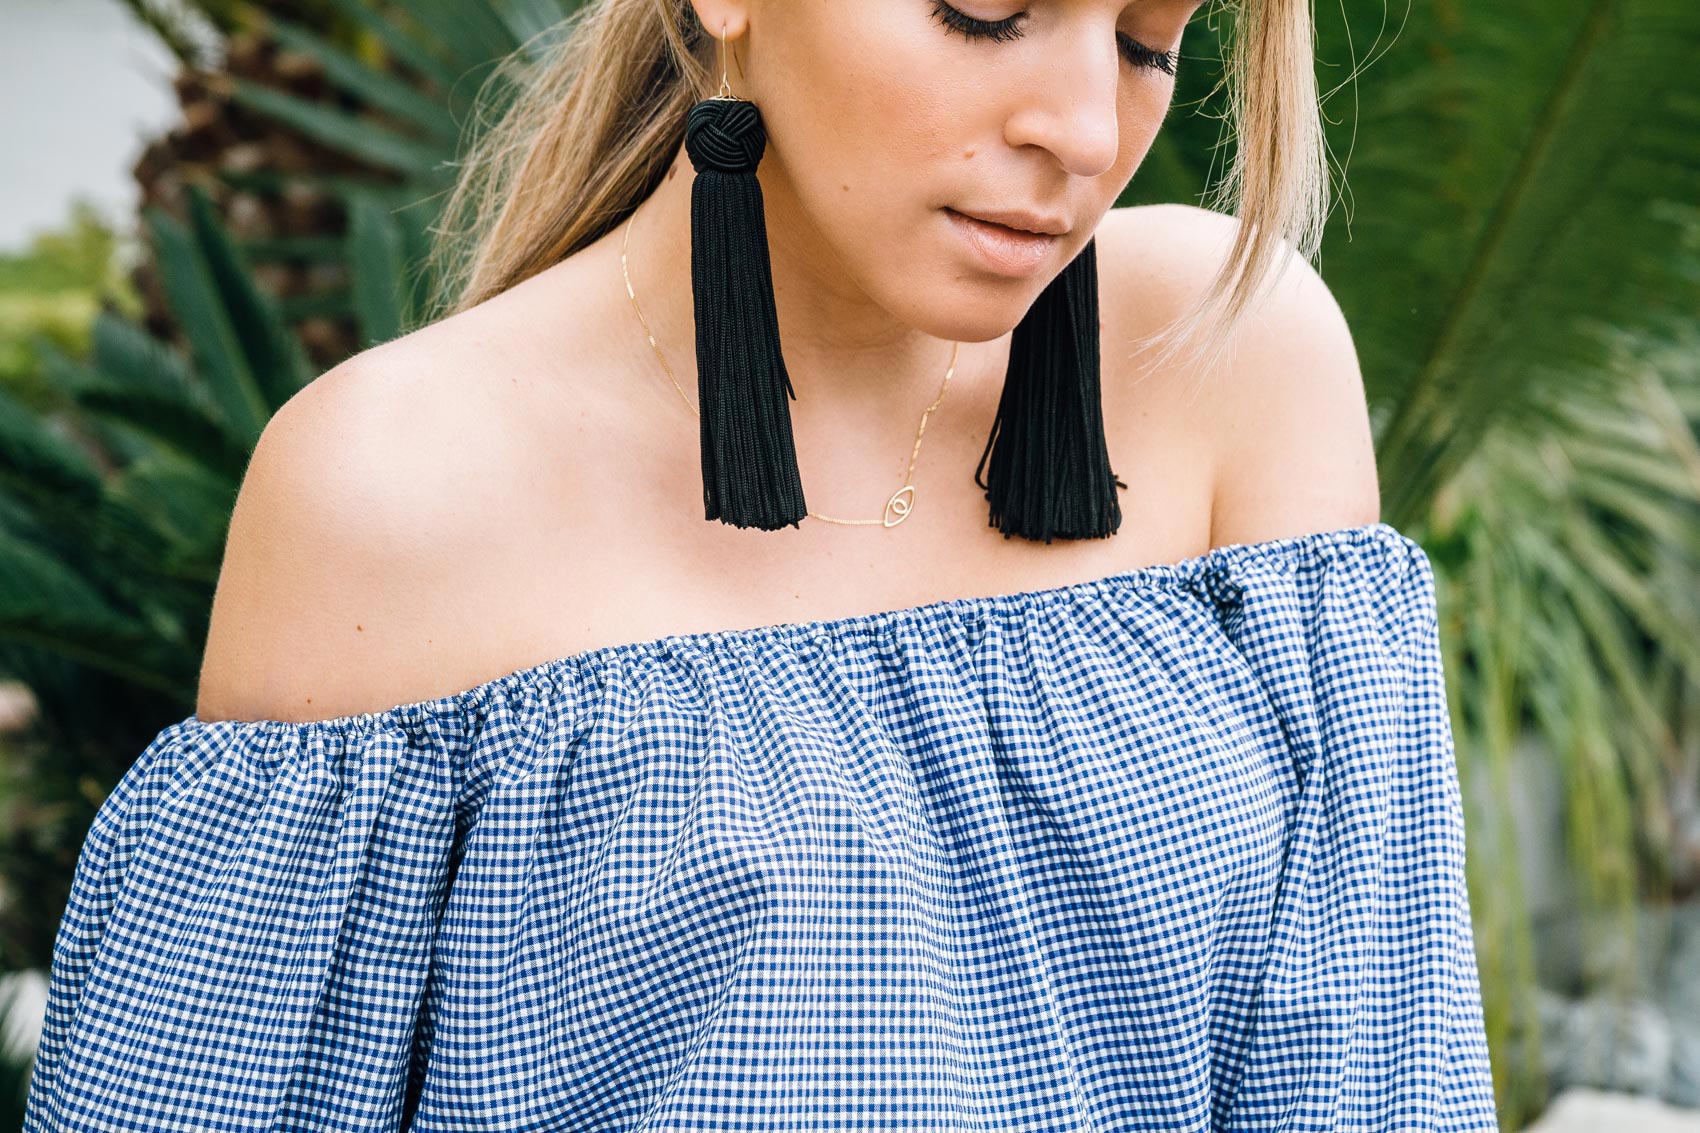 Maristella pairs statement tassel earrings with an off the shoulder top